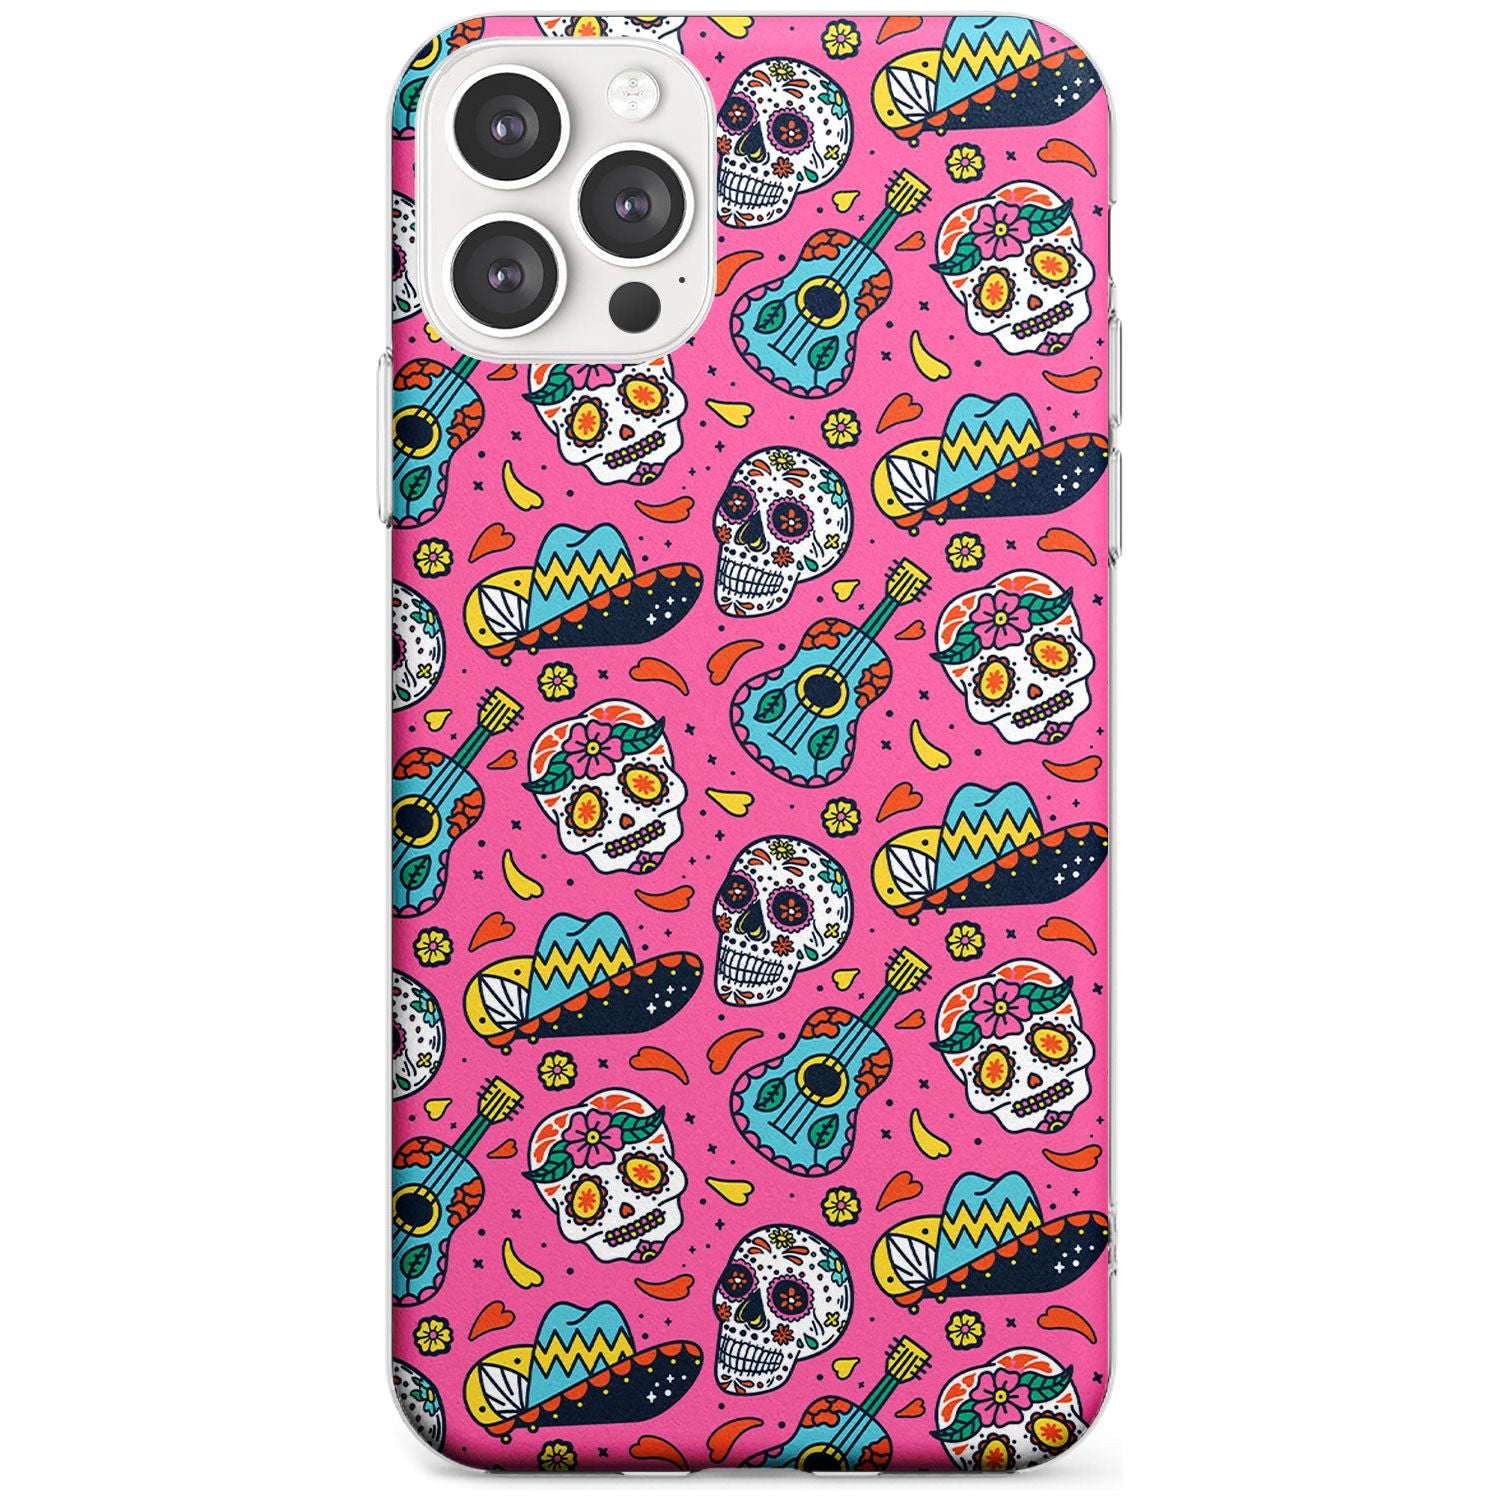 Pink Day of The Dead Pattern Slim TPU Phone Case for iPhone 11 Pro Max